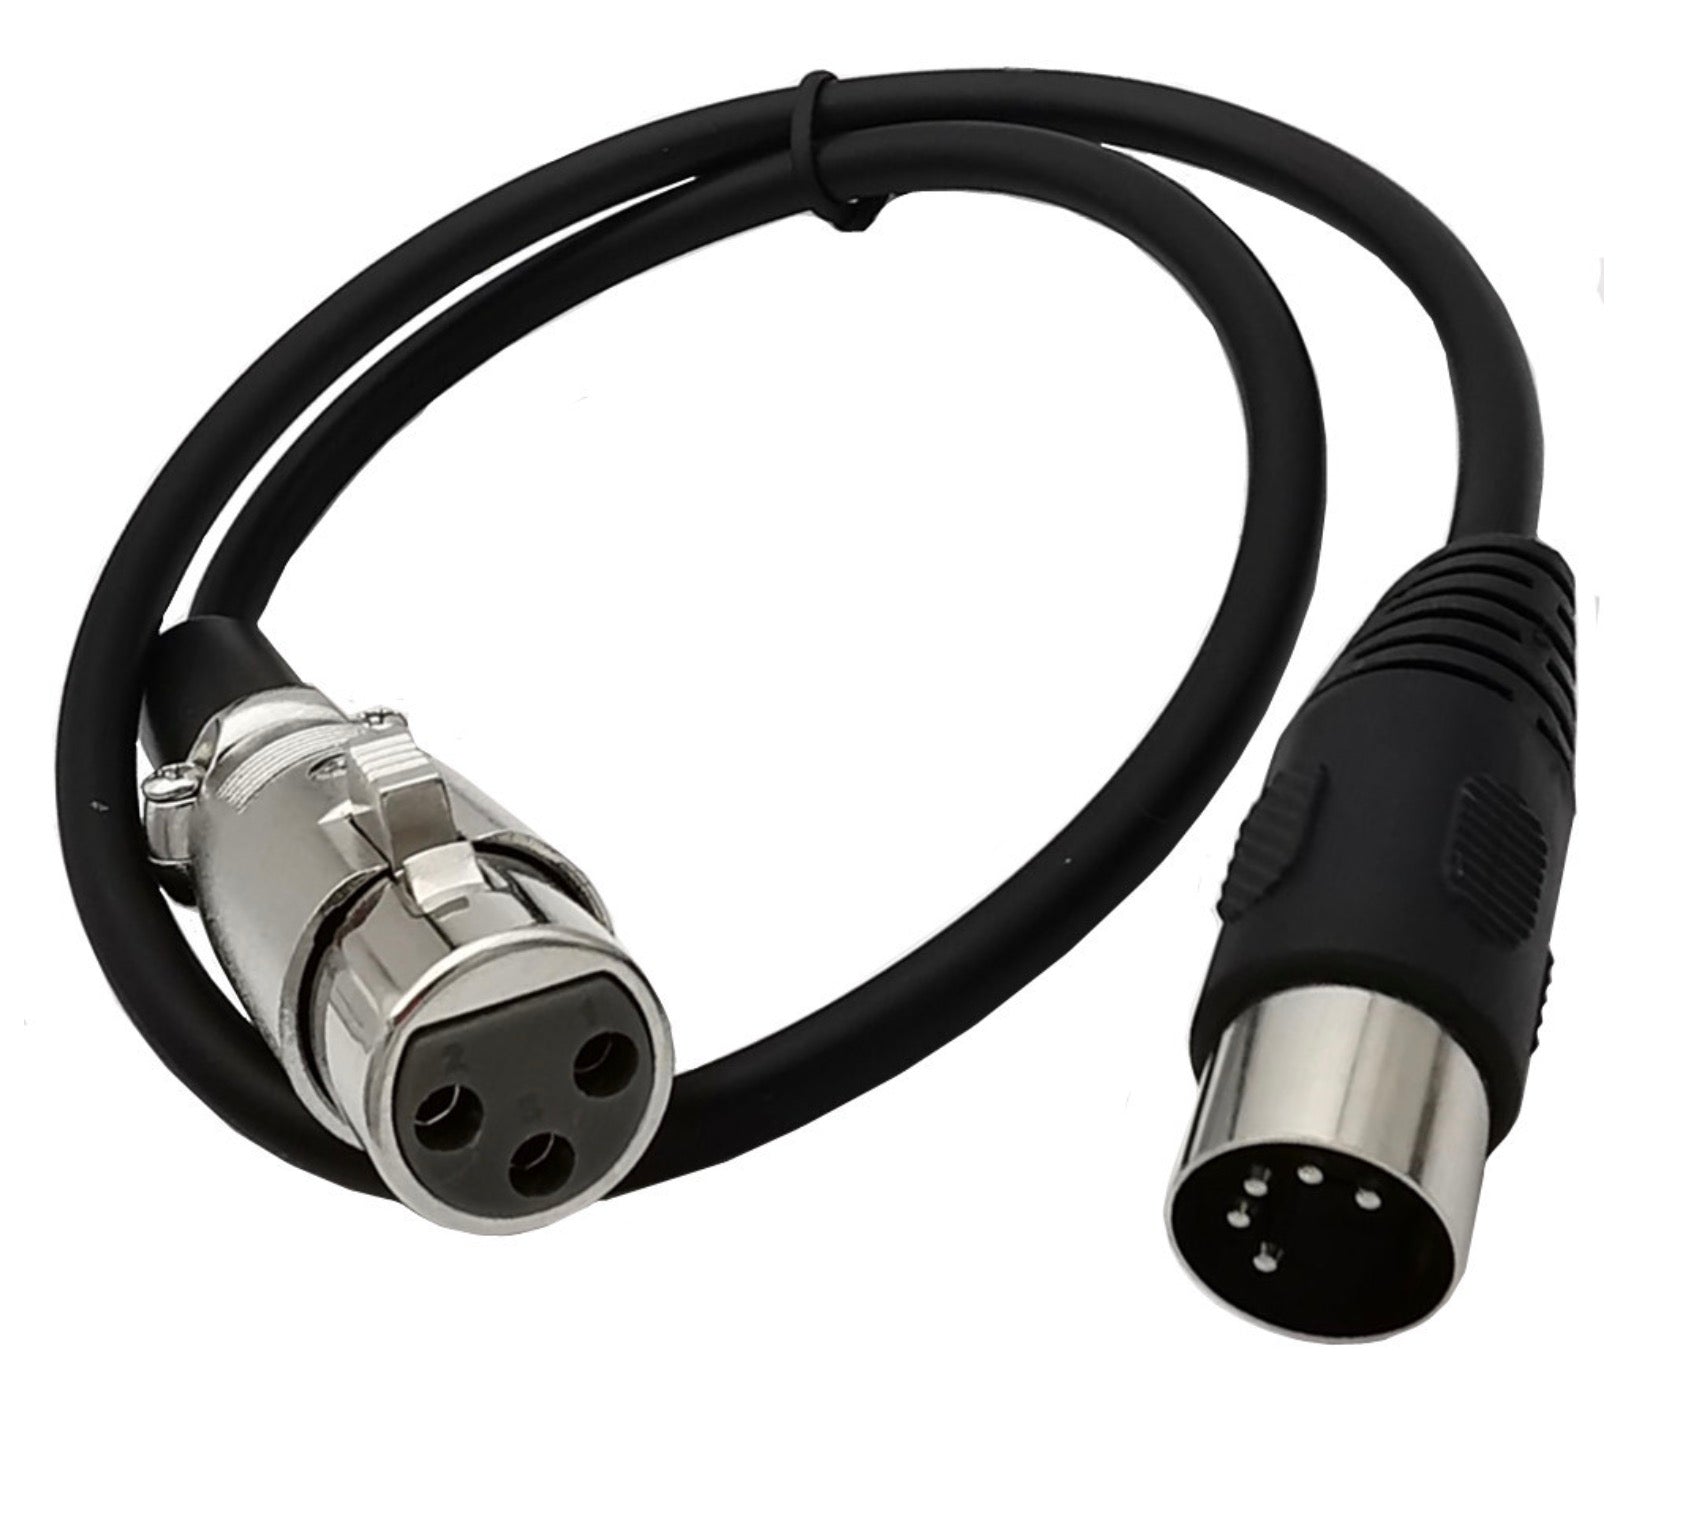 5-pin Din to XLR 3-pin Female Audio Cable for Music Instruments